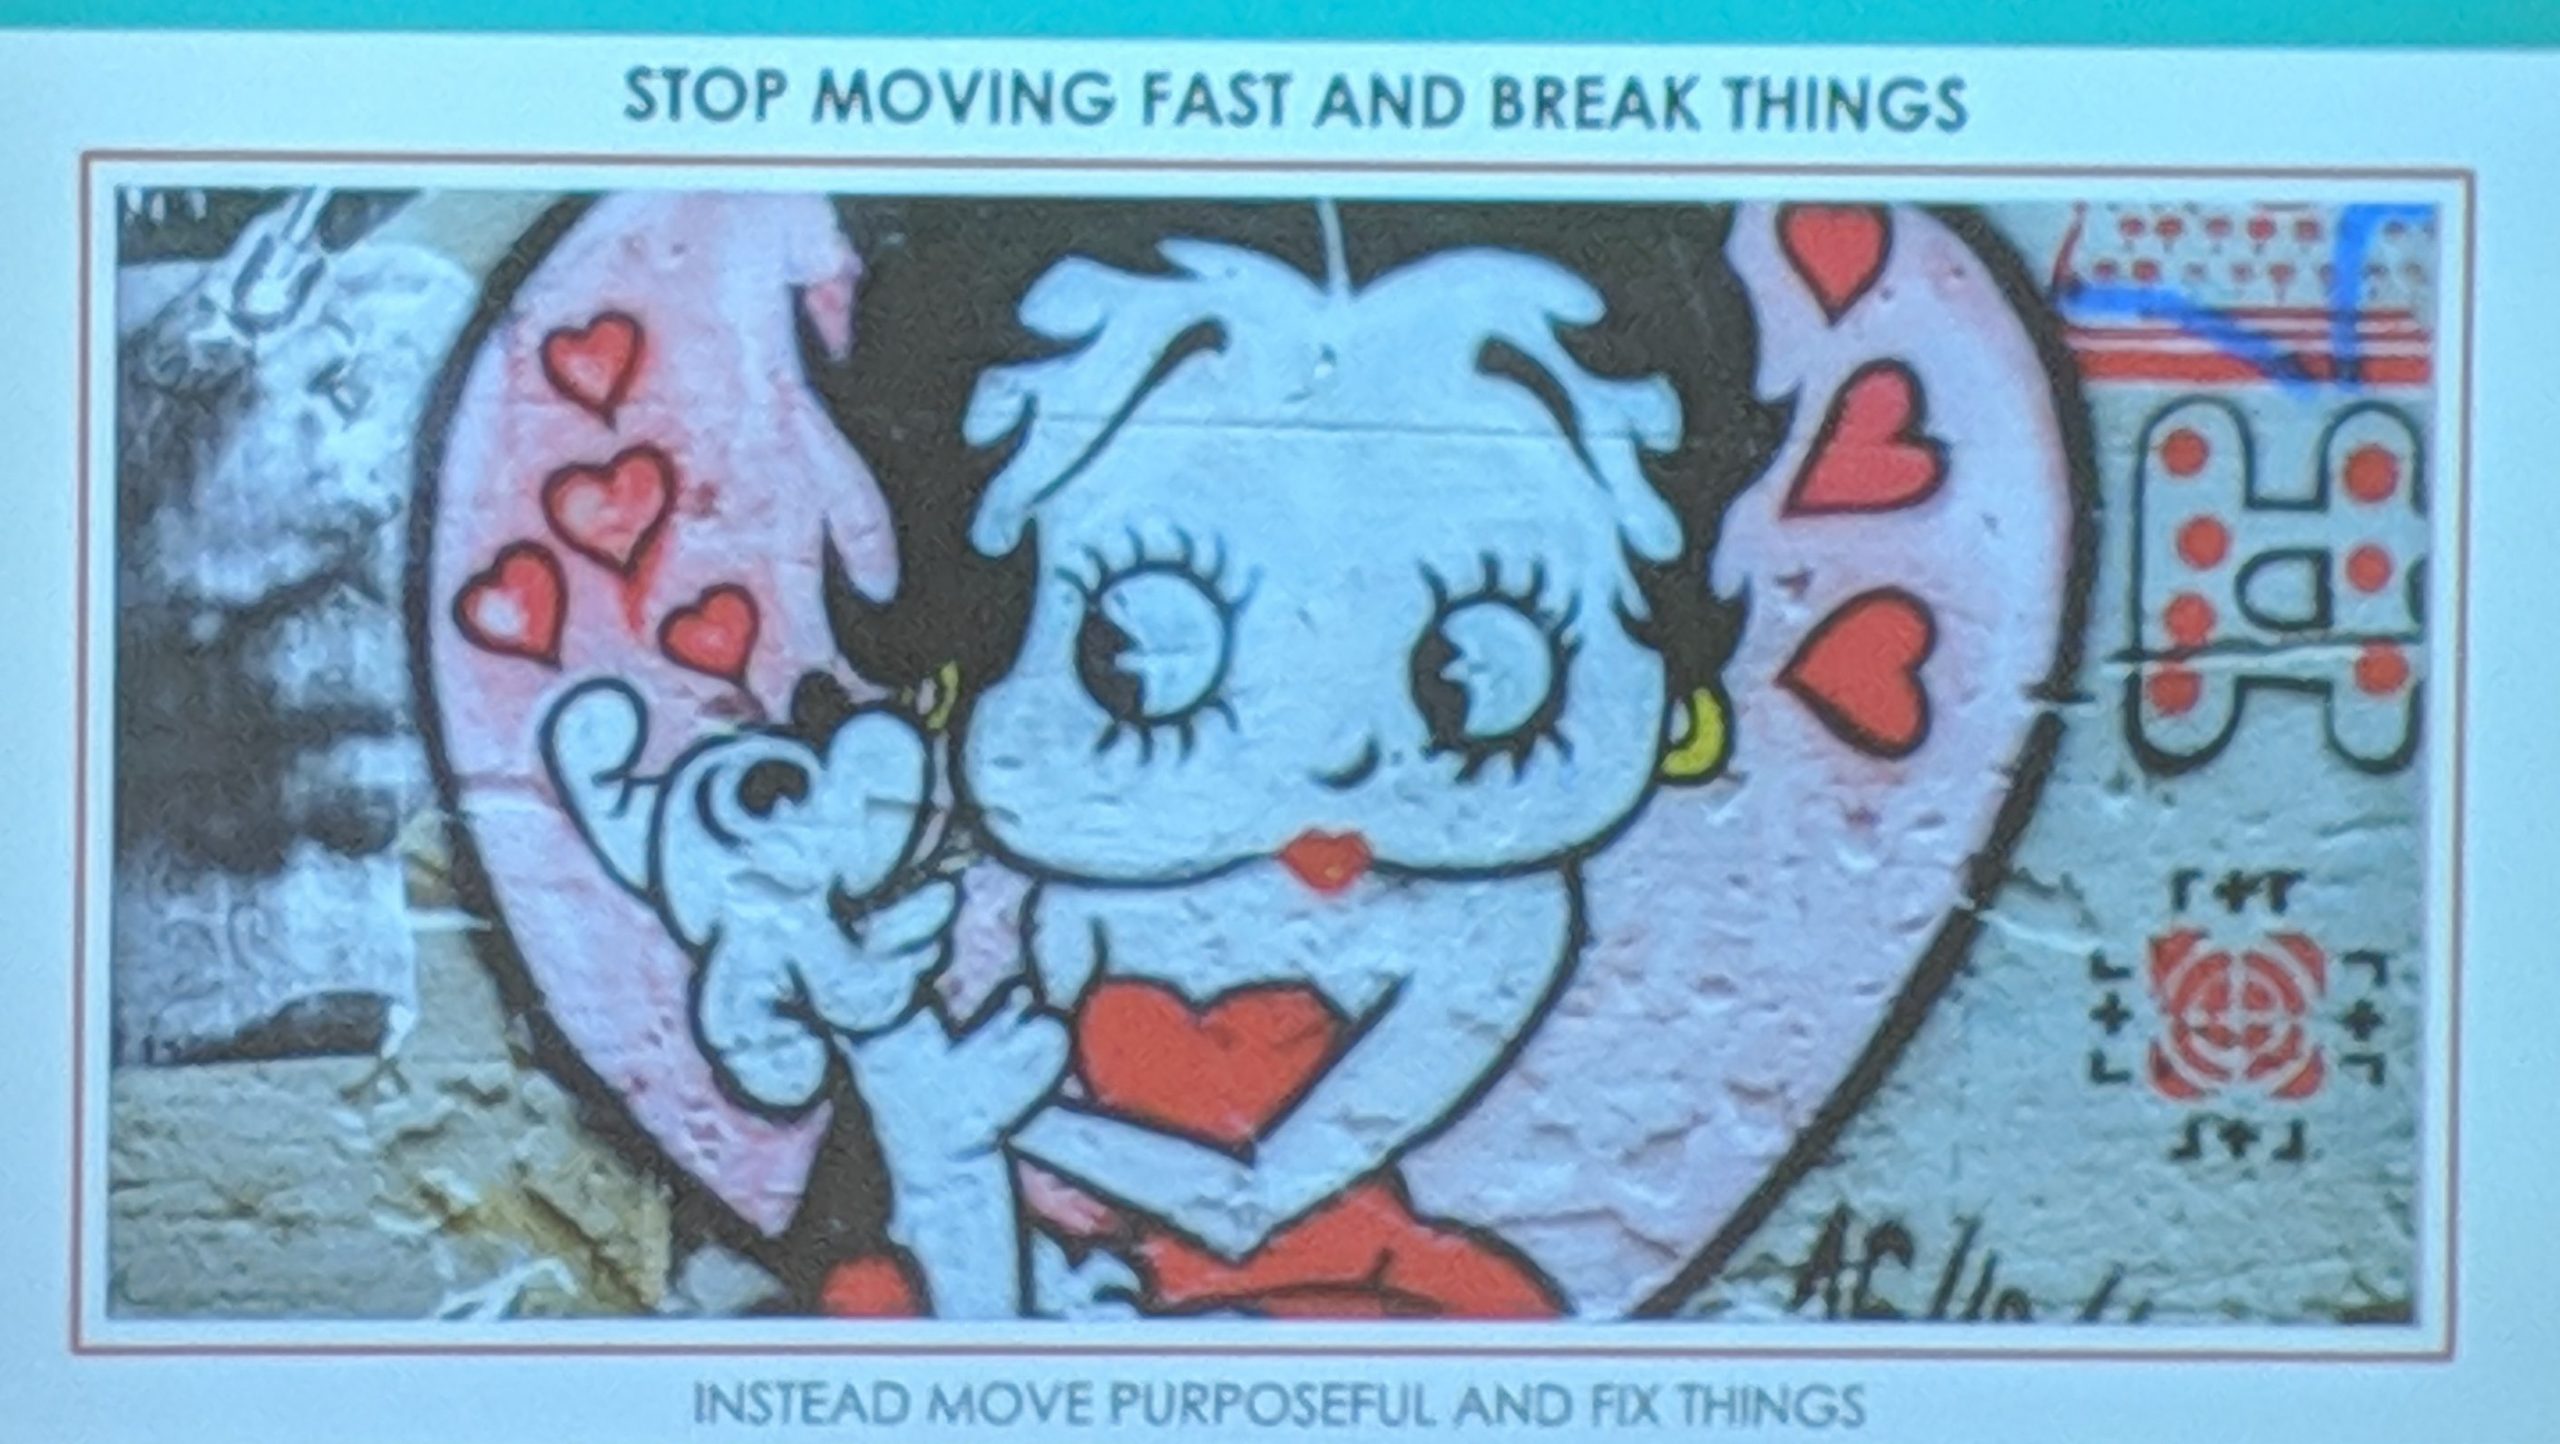 Slide borrowed from Alyssa Wright’s Keynote address - move purposeful, and fix things